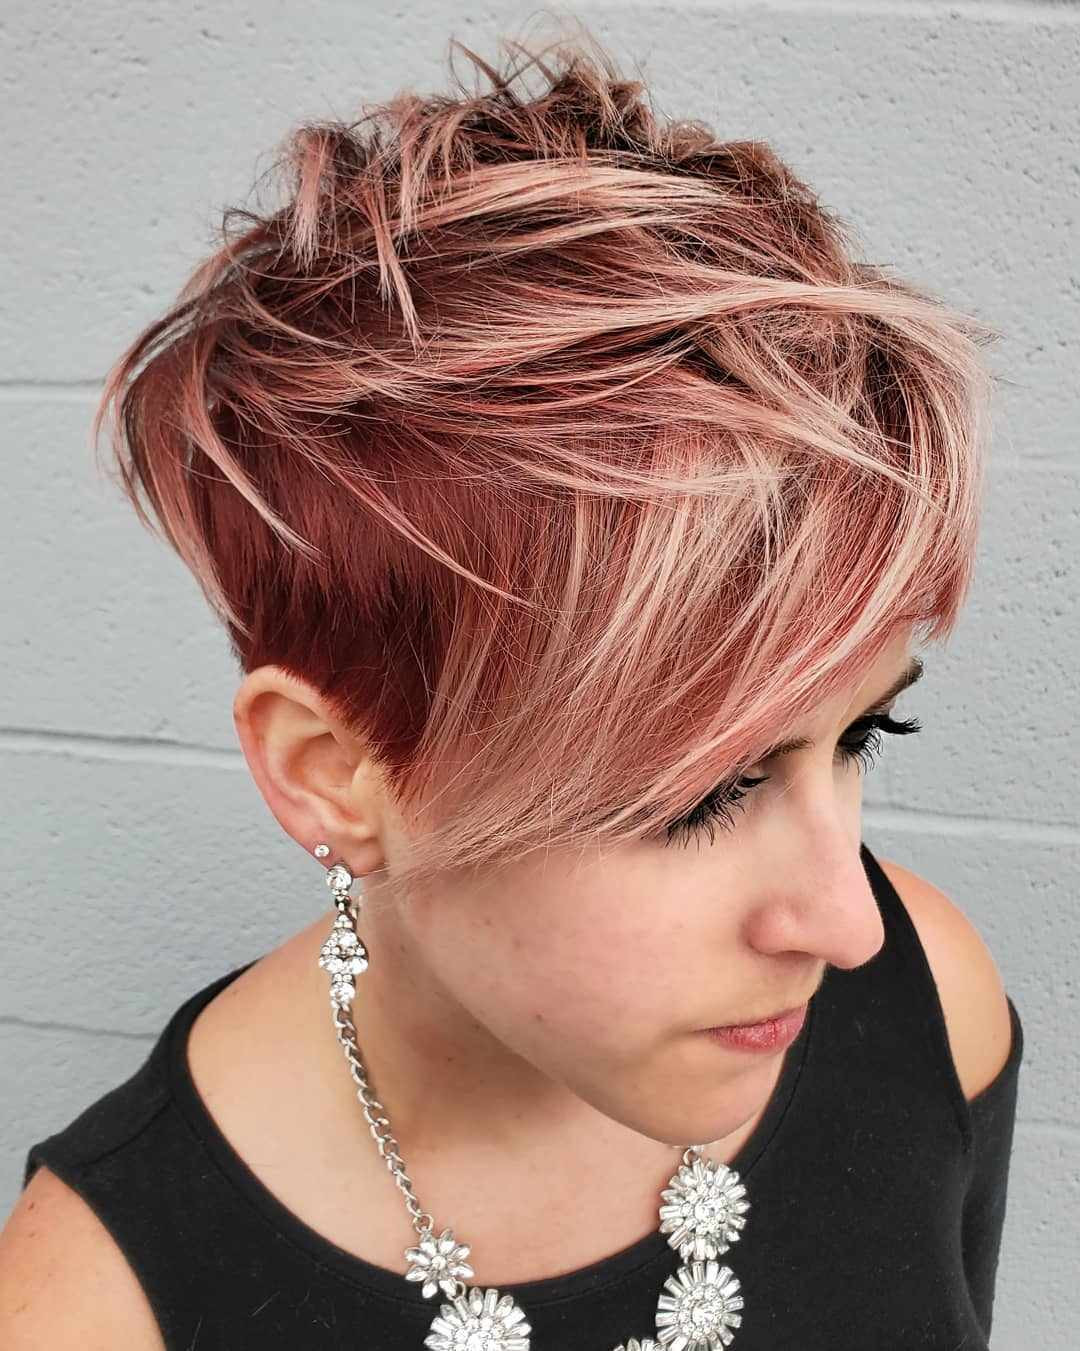 2020 Hairstyles For Medium Hair
 30 Roaring and Attractive Short Hairstyles 2020 Haircuts